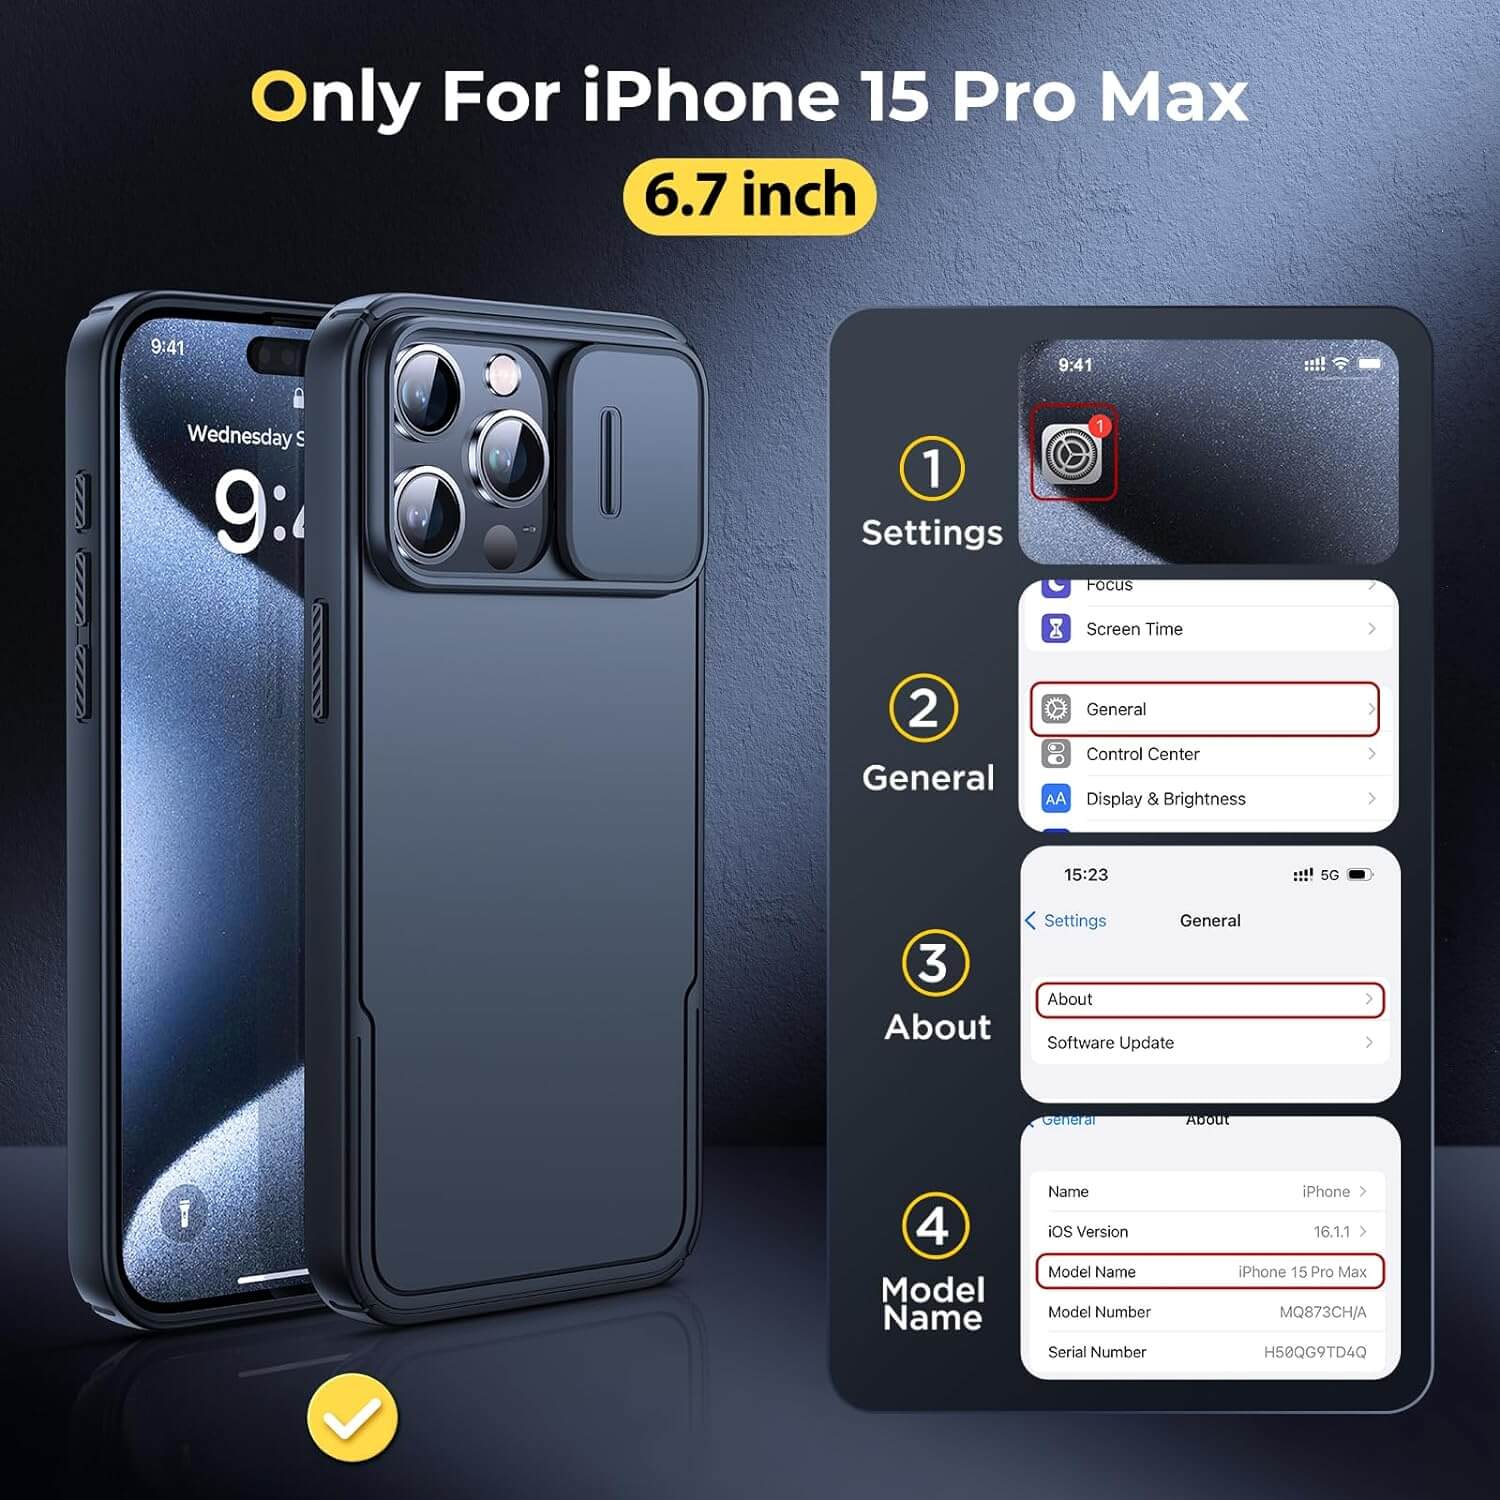 Humixx iPhone 15 Pro Max Case Magnetic Camera Cover Black Only For iPhone 15 Pro Max 6.7 inch 